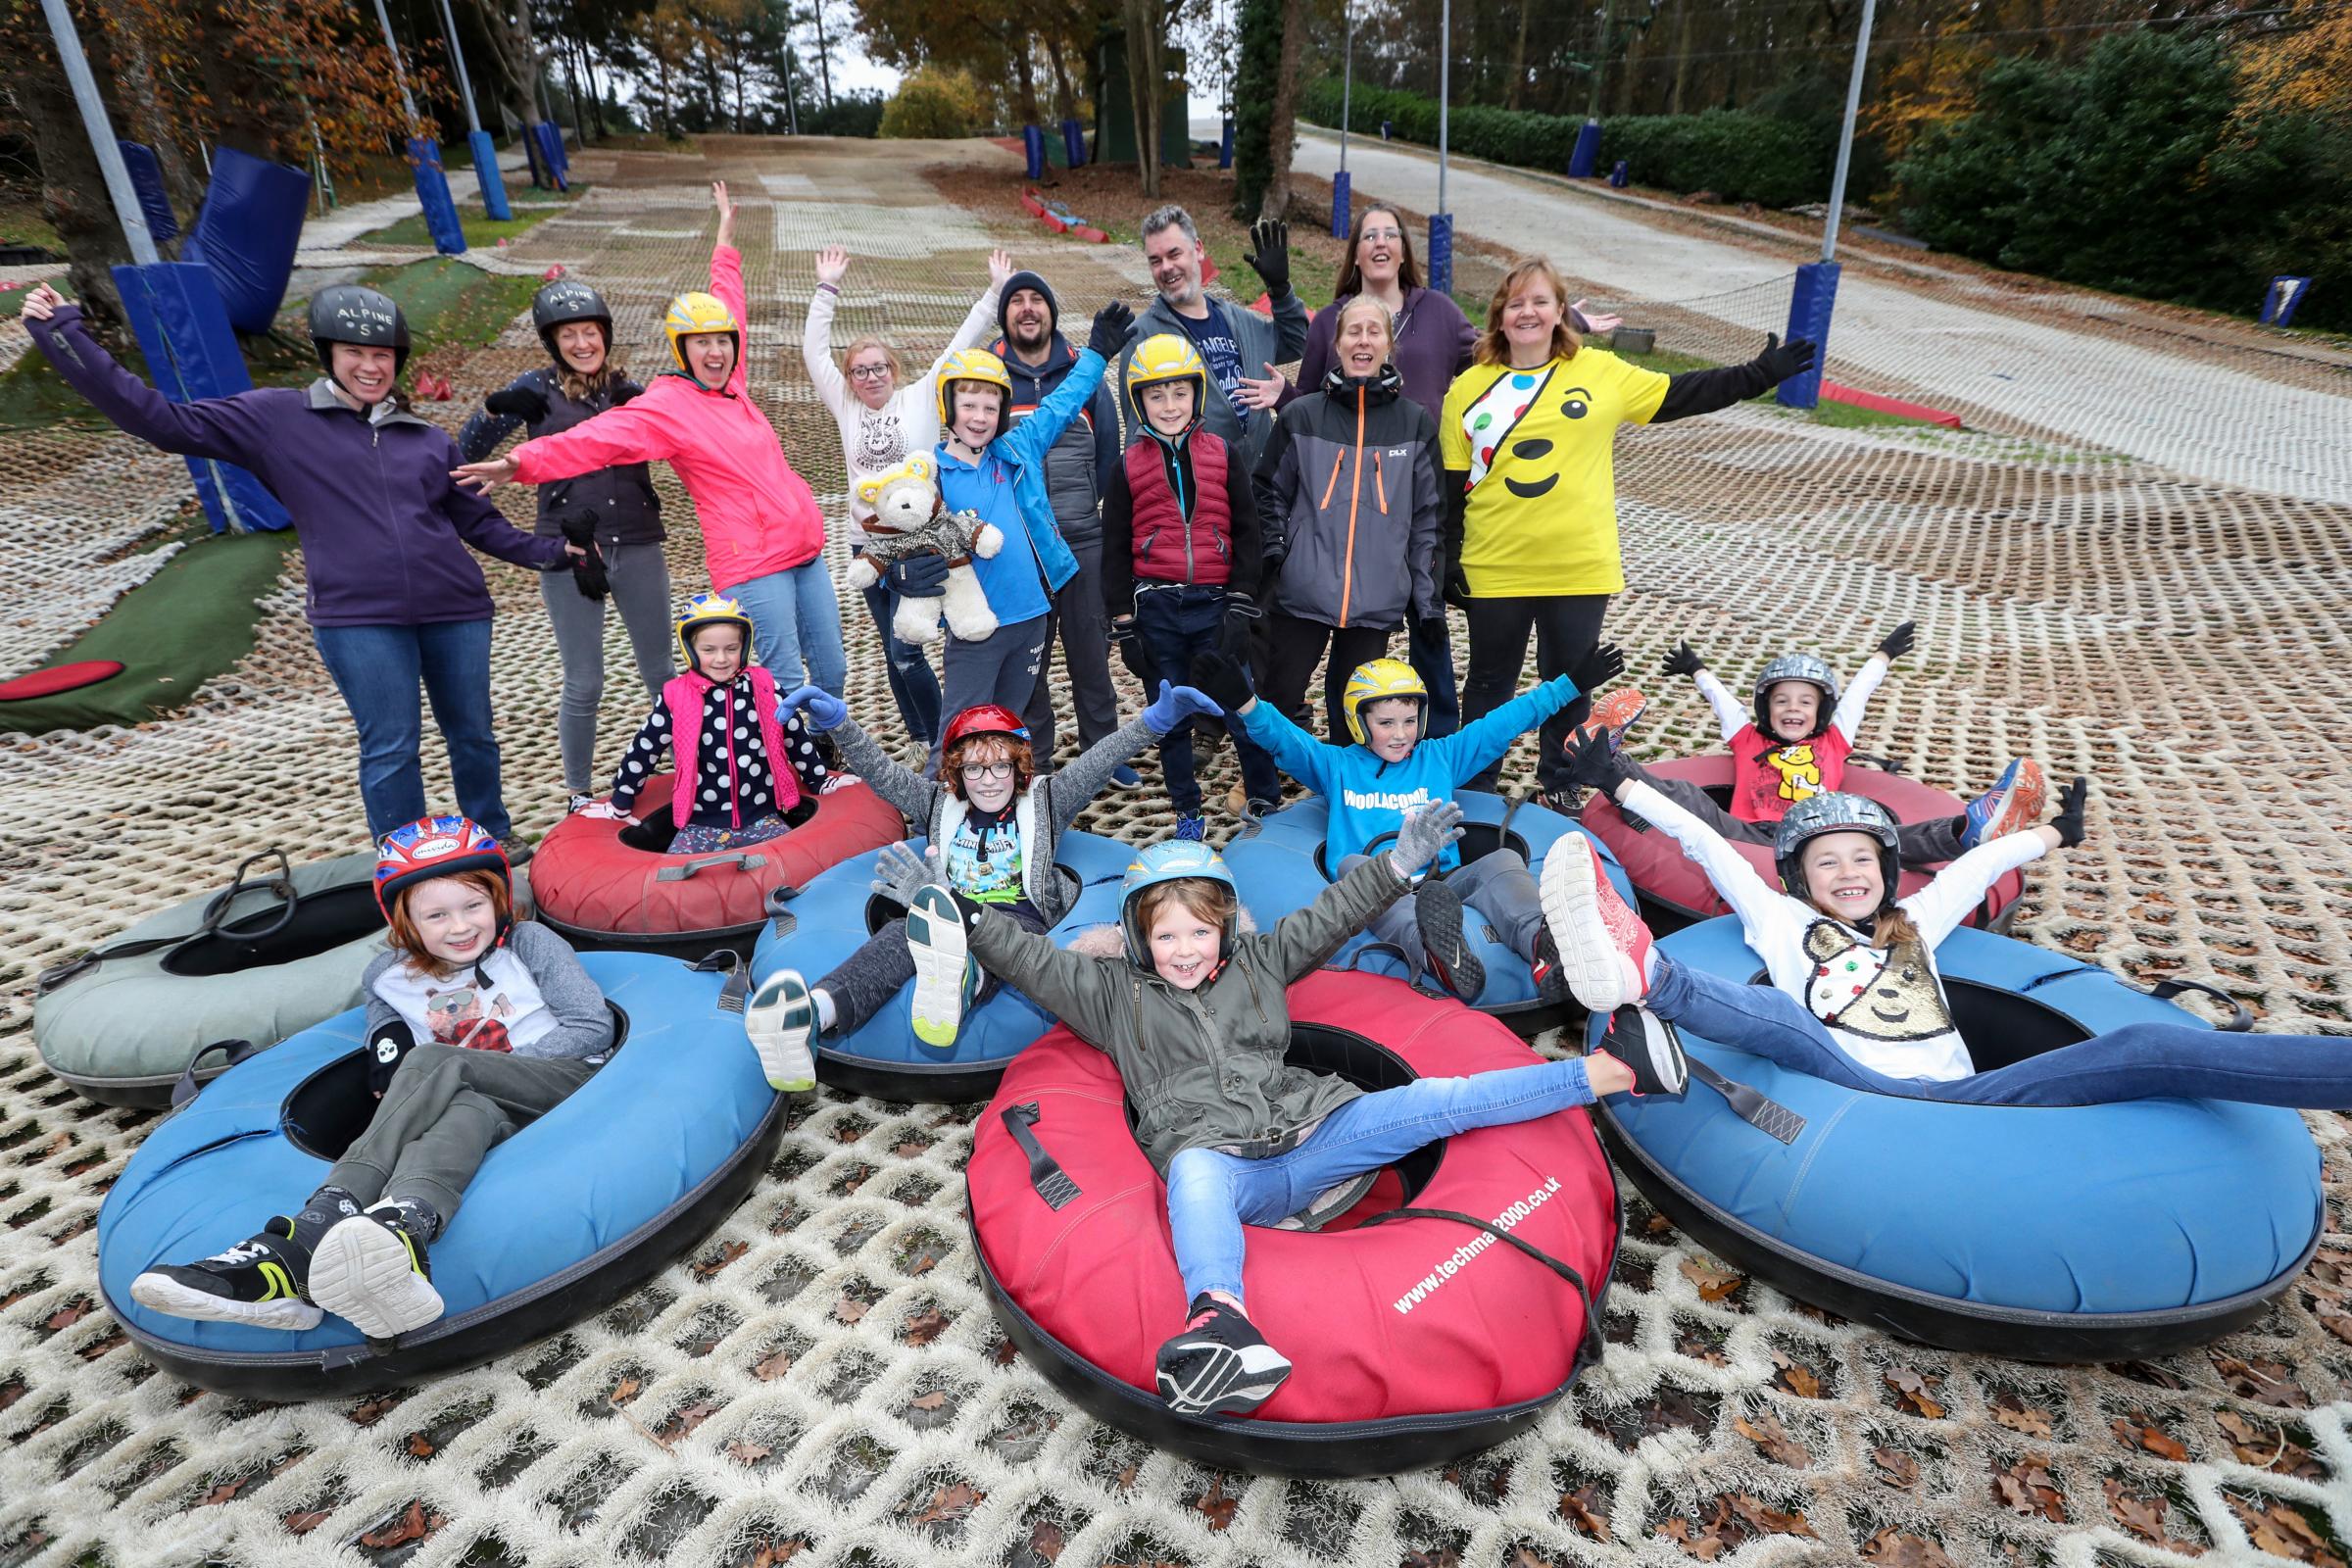 12 hour donut ride challenge in aid of Children in Need at the Alpine Snowsports centre at Southampton Sports Centre.